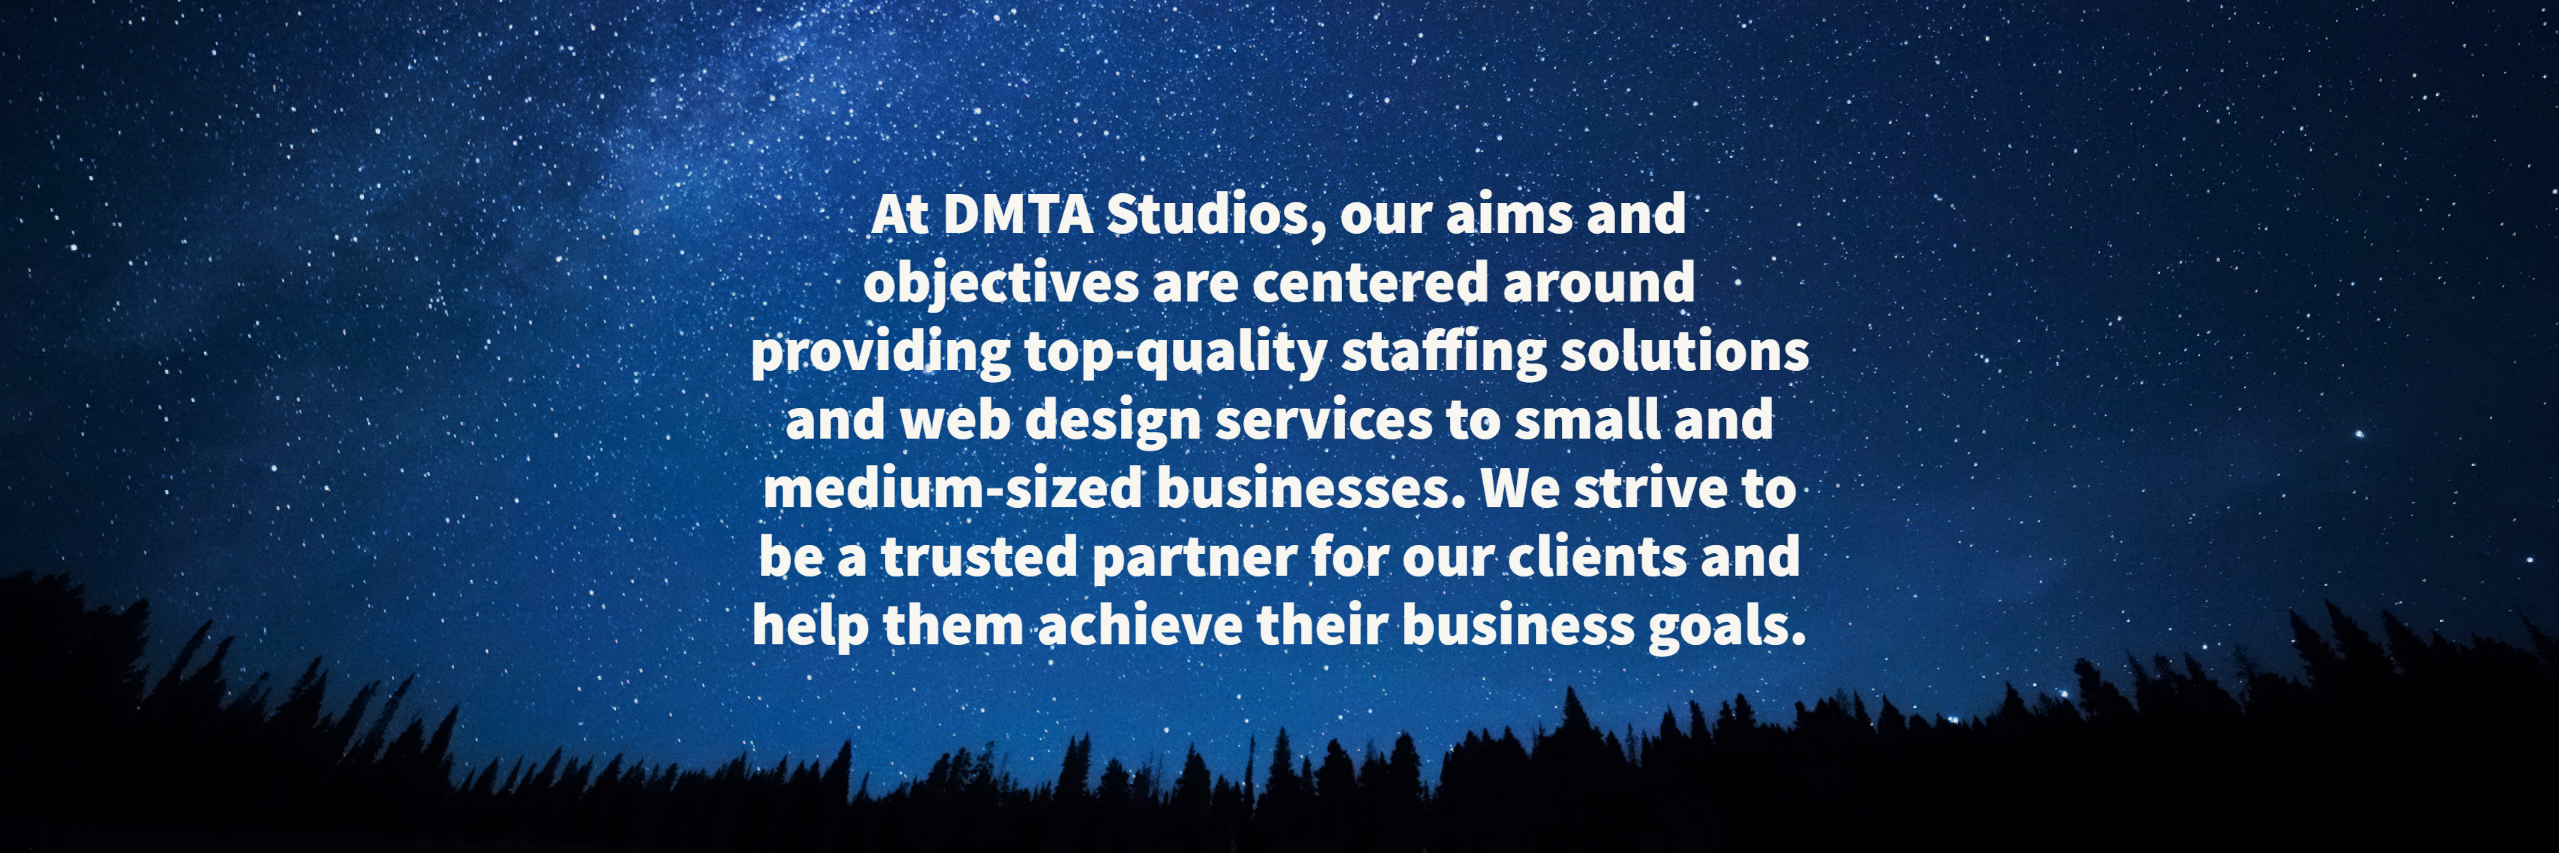 At DMTA Studios, our aims and objectives are centered around providing top-quality staffing solutions and web design services to small and medium-sized businesses. We strive to be a trusted partner for our clients and help them achieve their business goals.